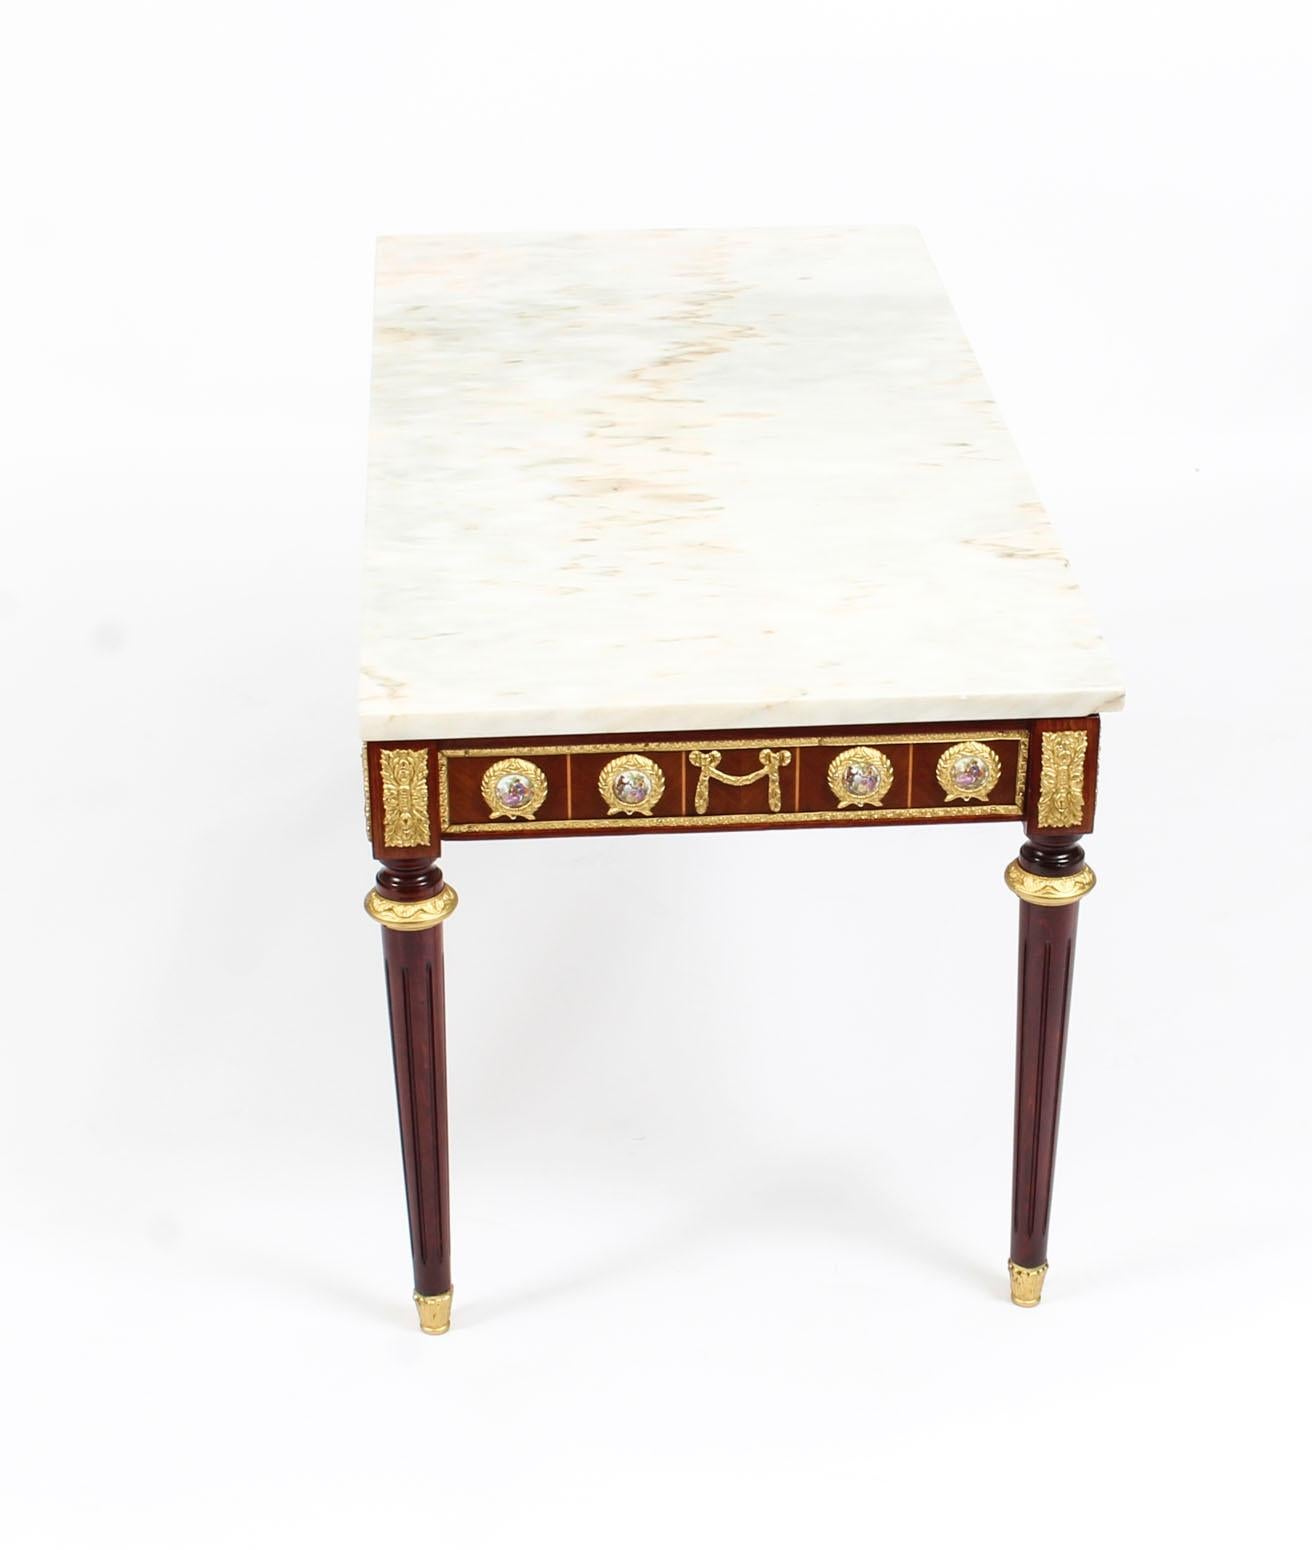 Porcelain Pair of Ormolu Mounted Coffee Tables Marble Tops H&L Epstein Midcentury